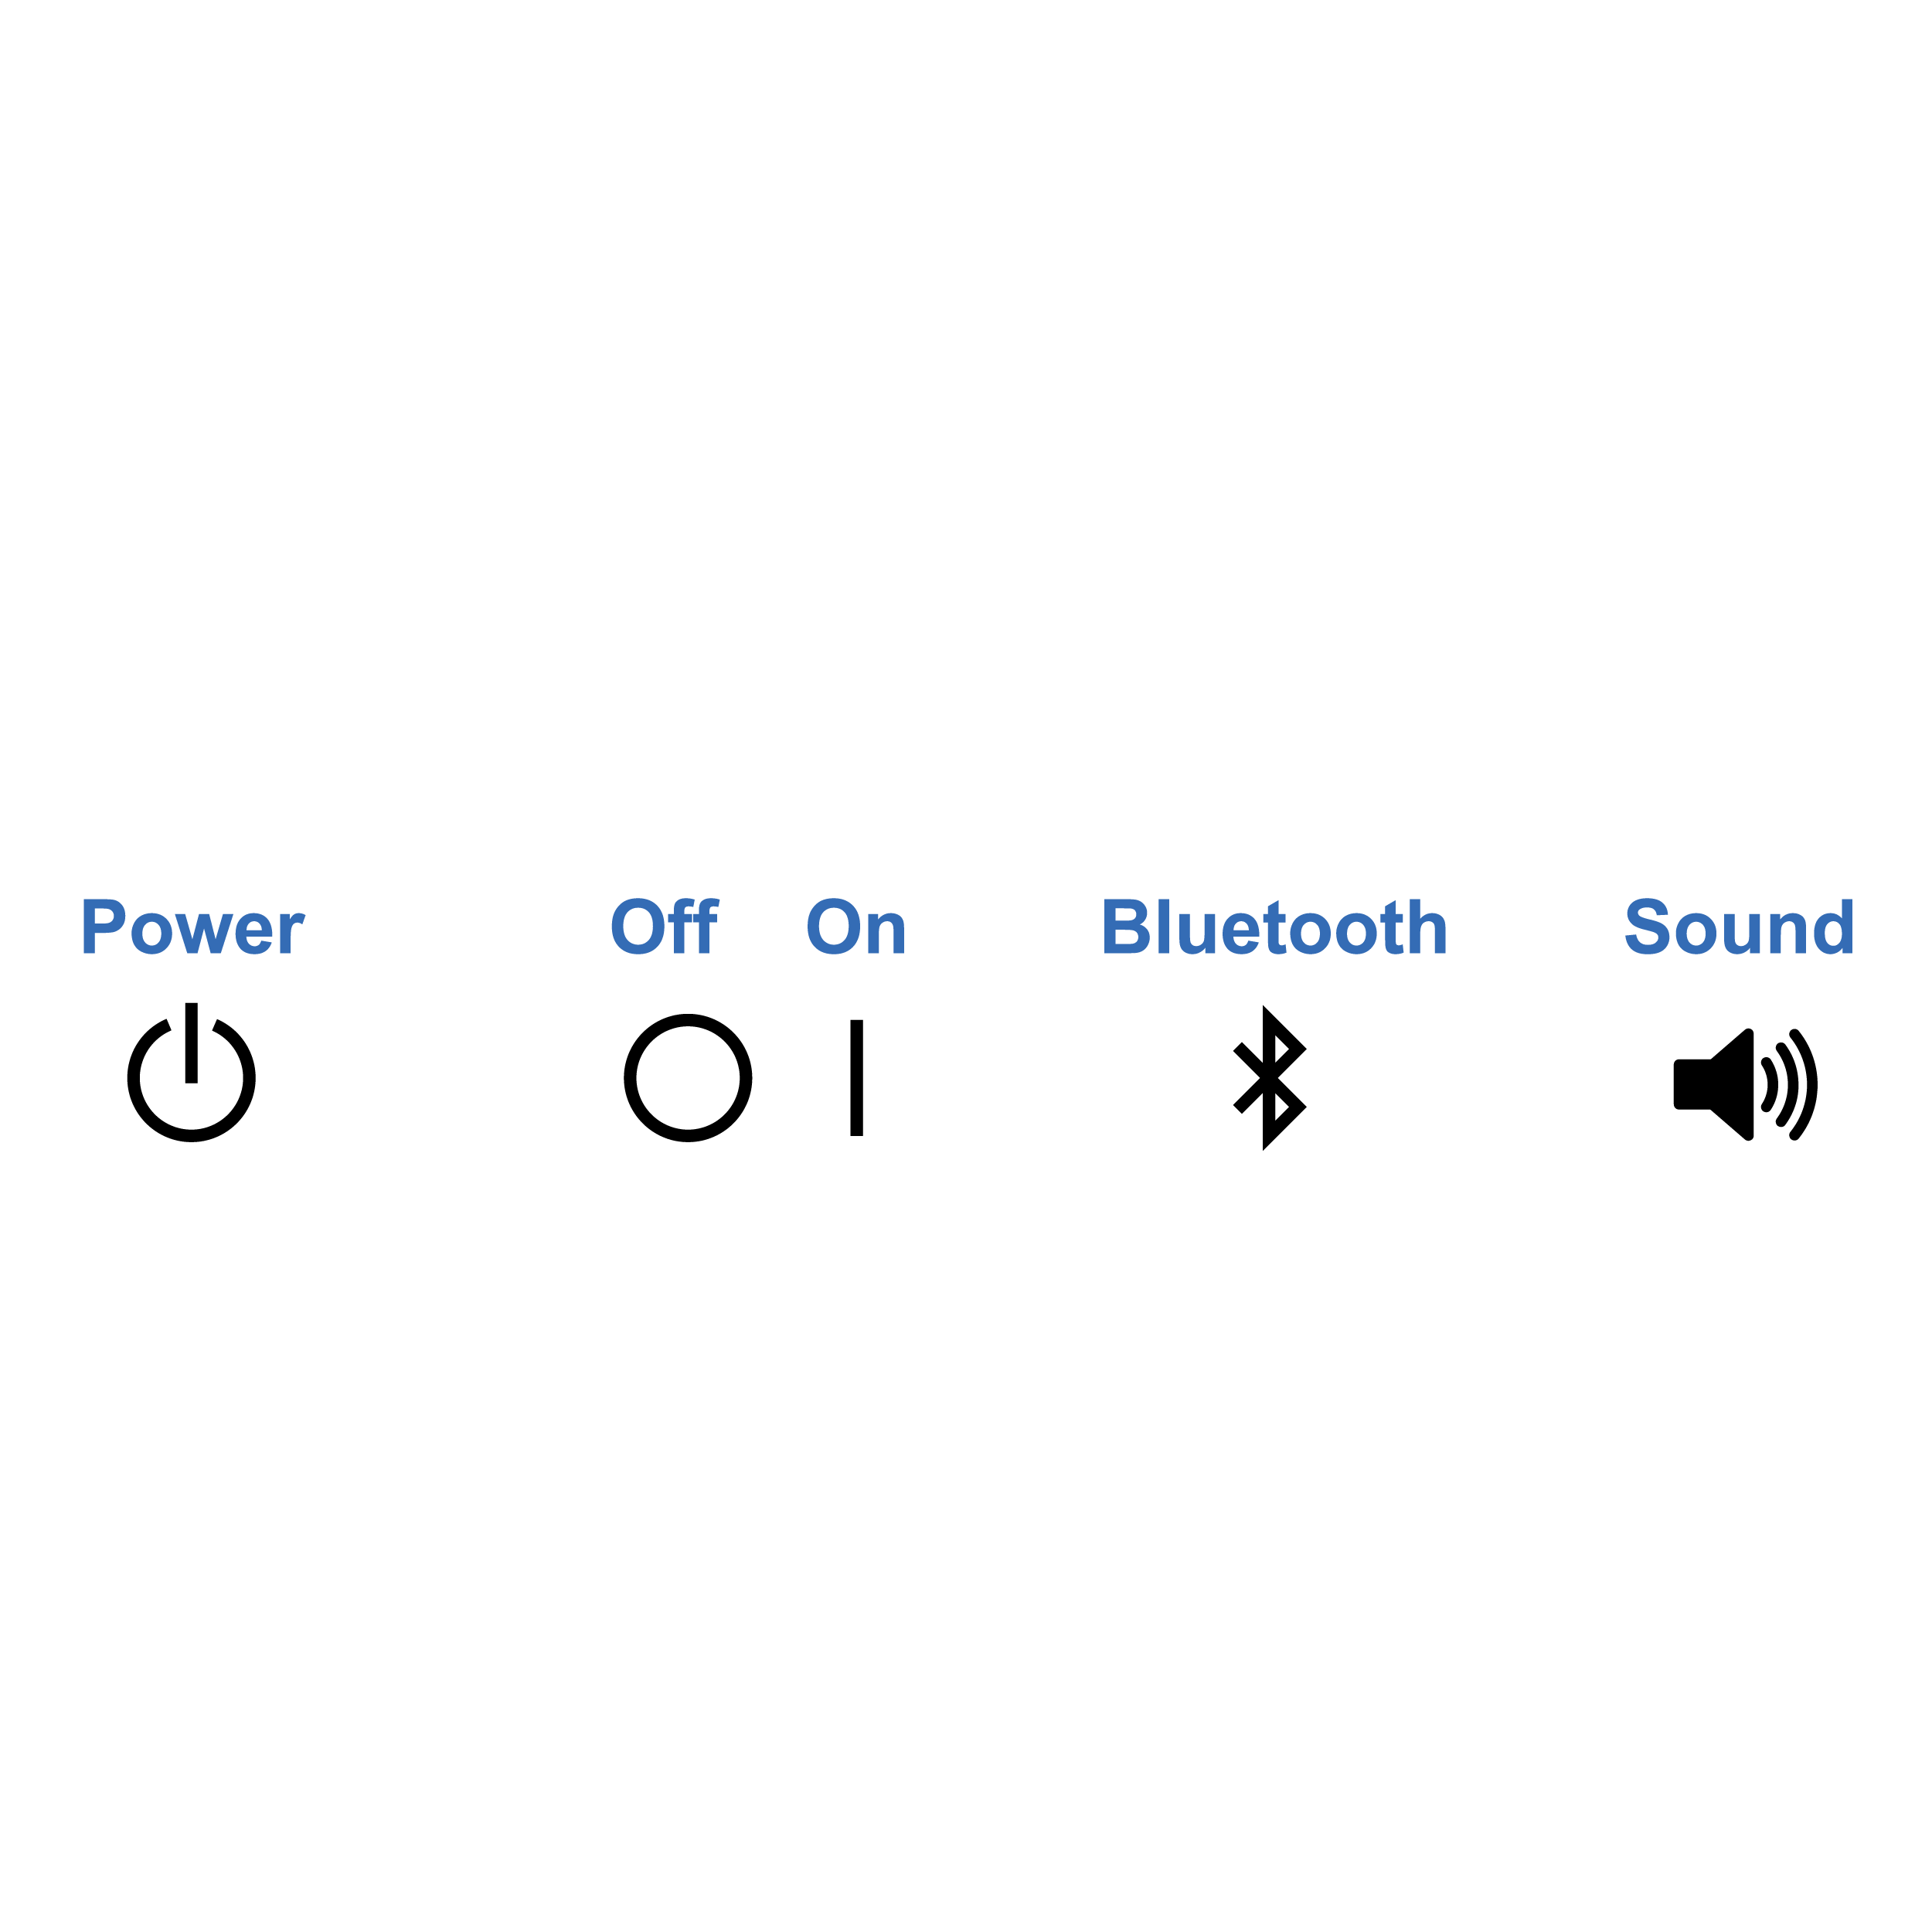 Standard symbols representing power, off, on, Bluetooth, and sound with text labels.